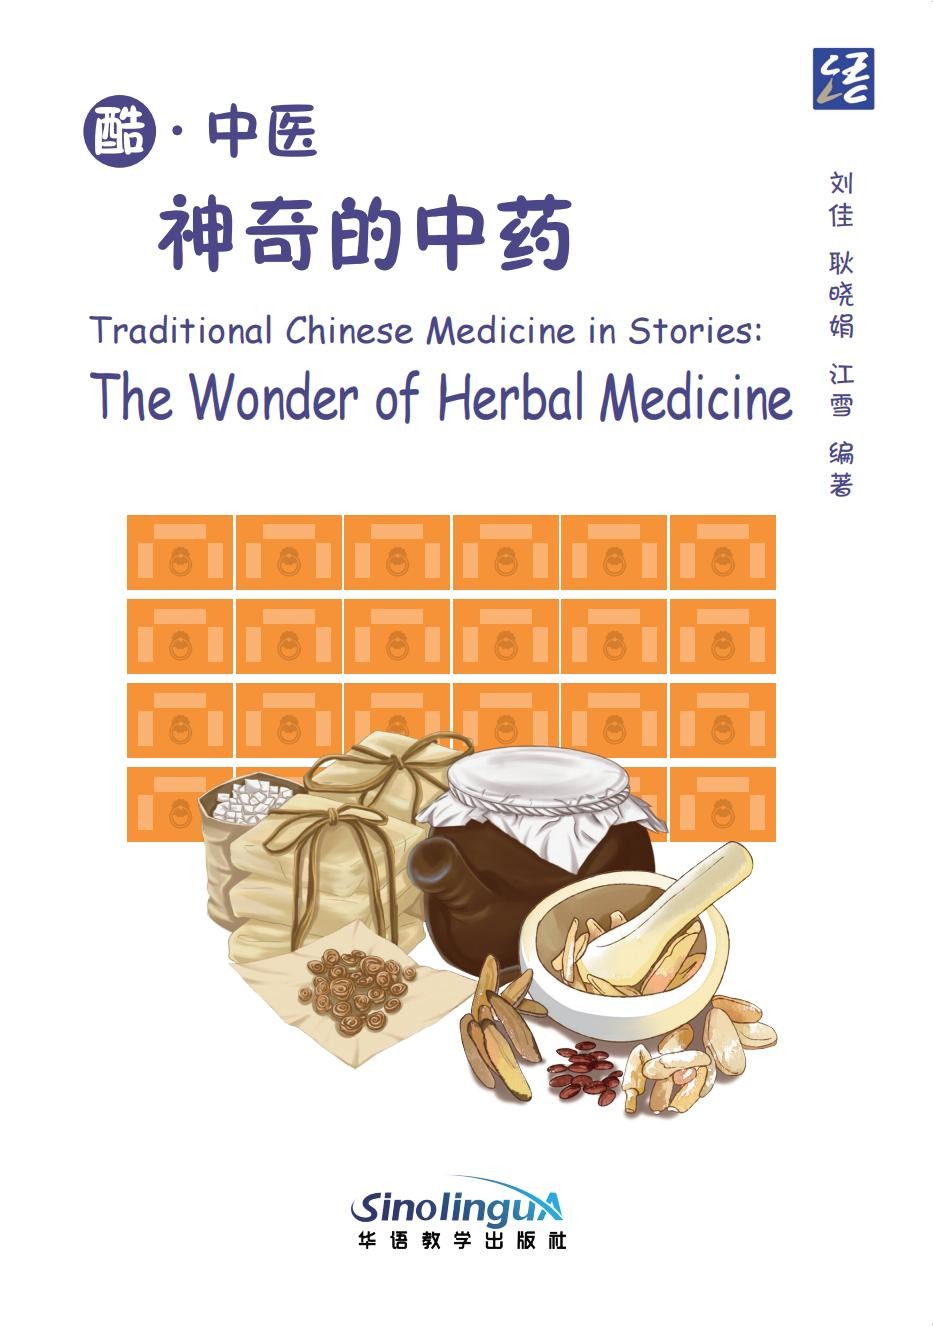 Traditional Chinese Medicine in Stories: The Wonder of Herbal Medicine